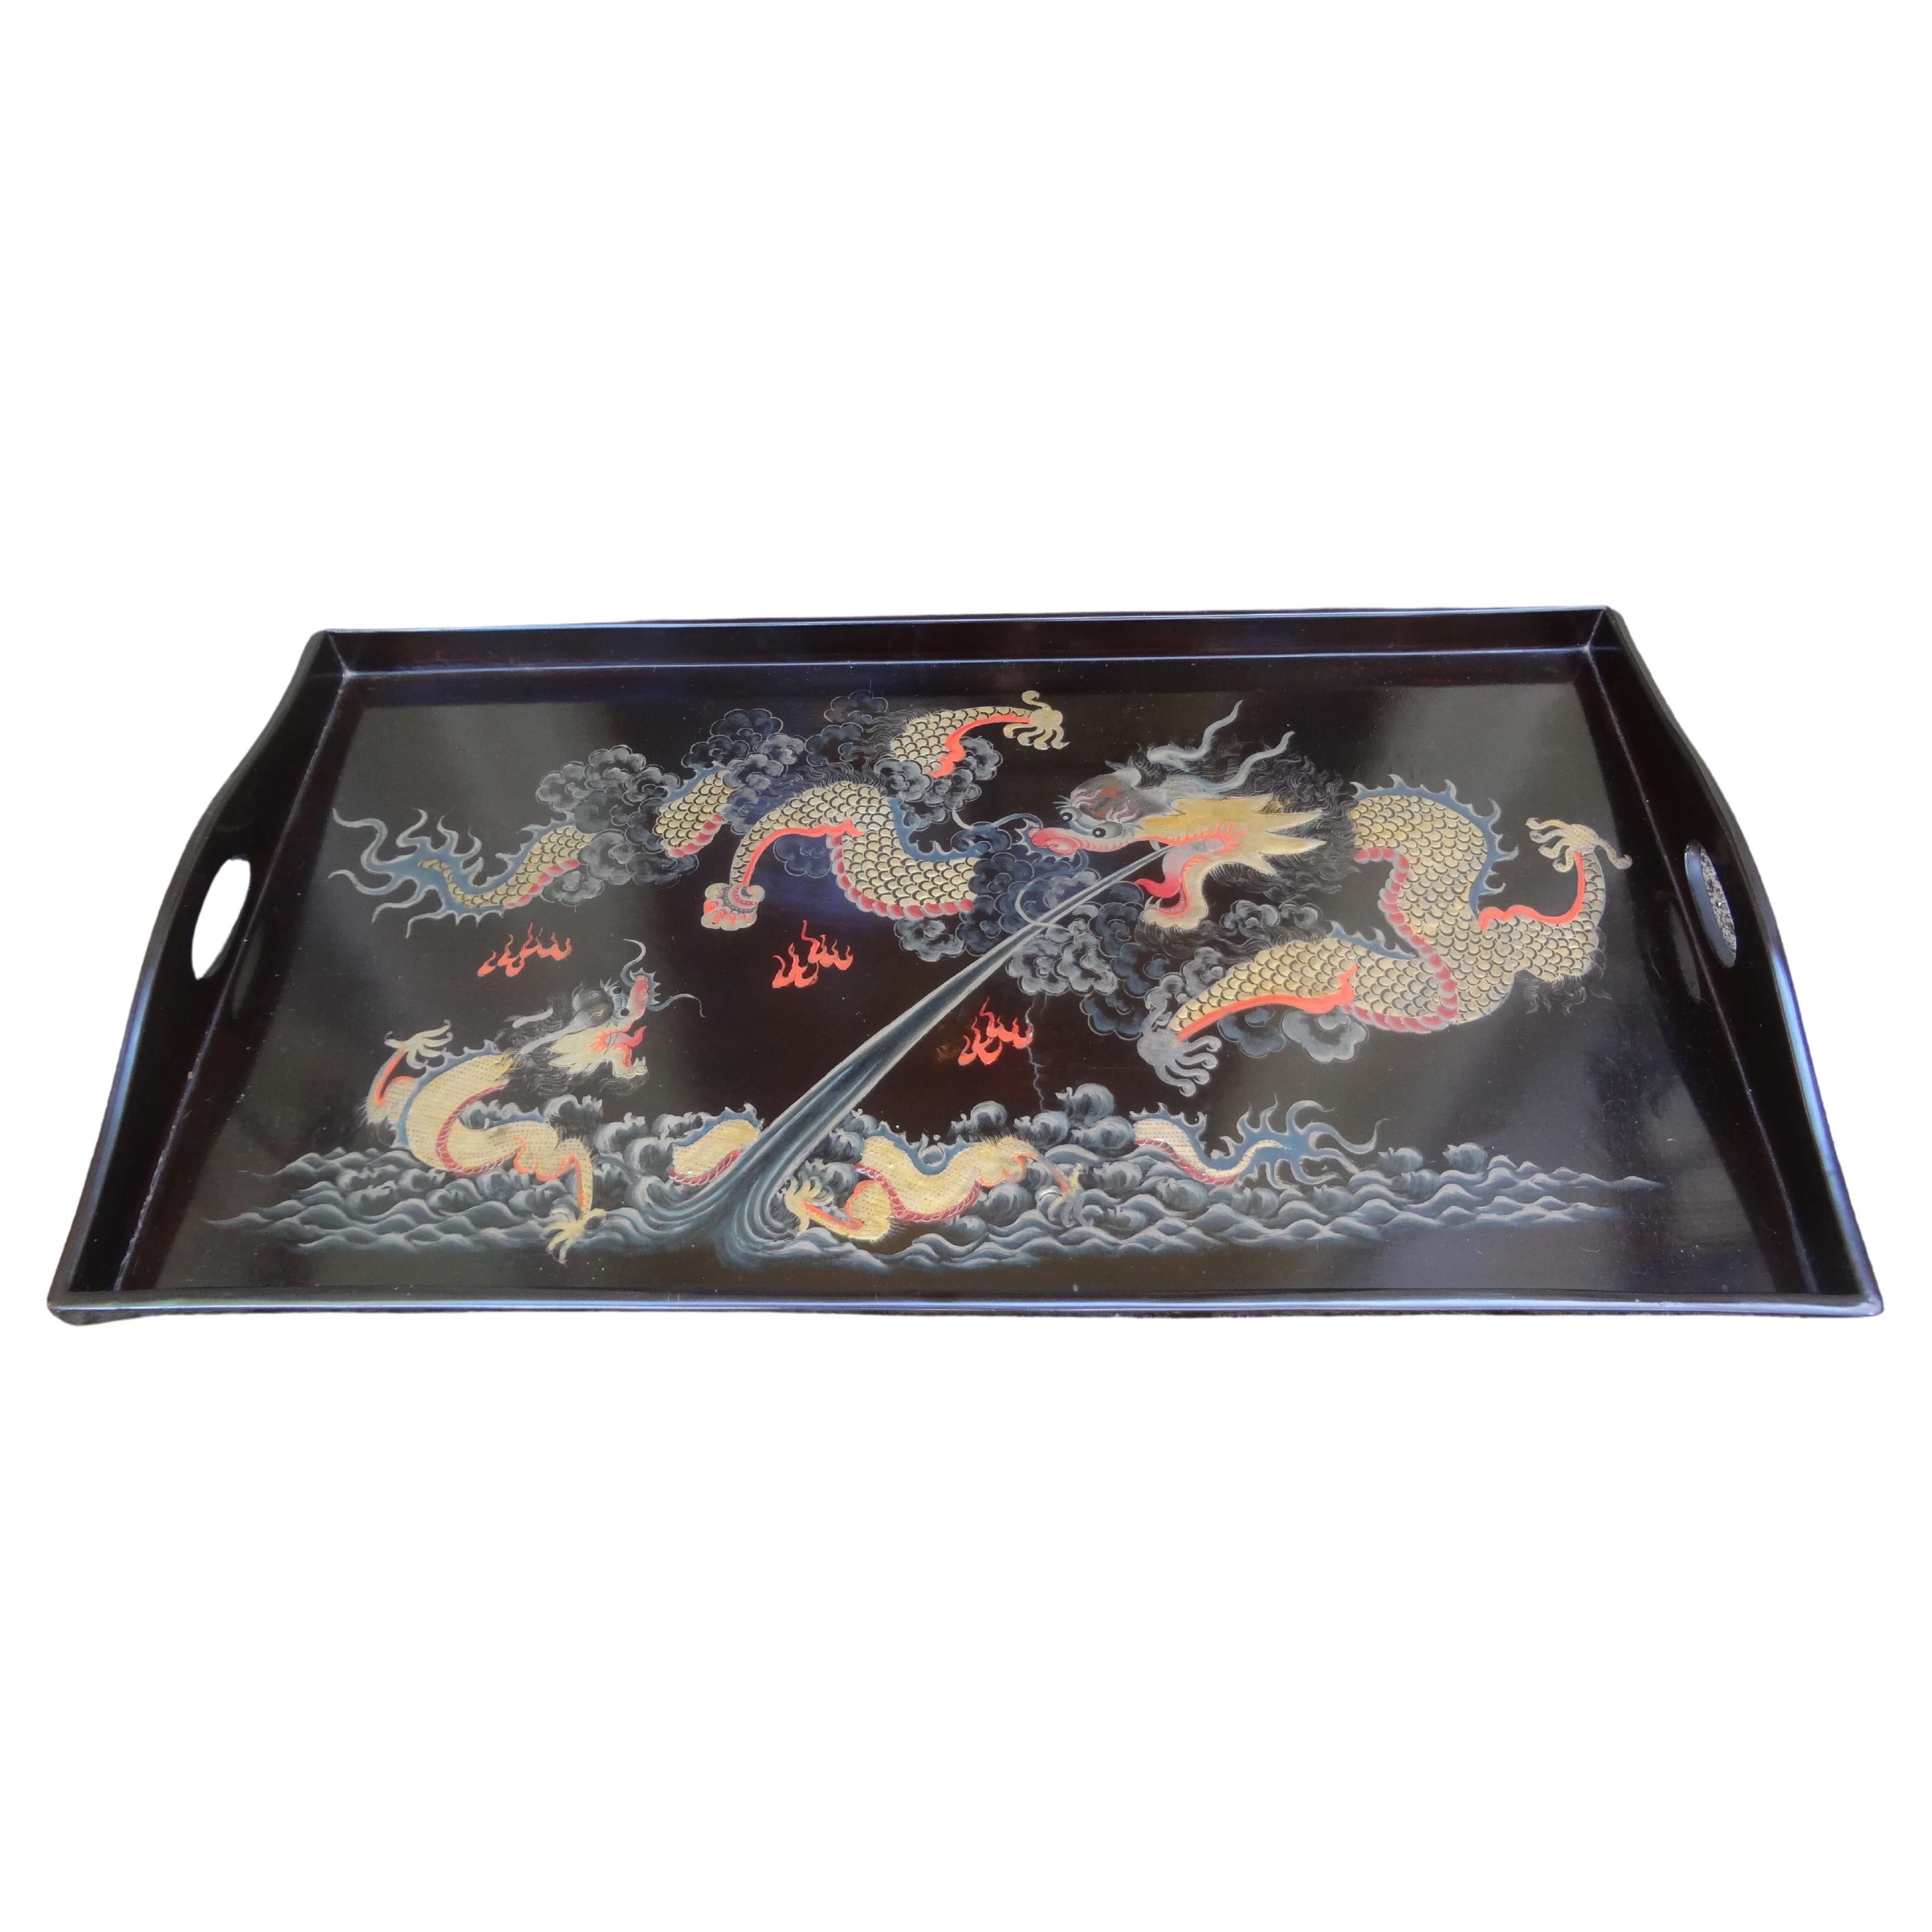 Antique Chinese Lacquer Tray With Dragons.
Our stunning Chinese lacquer tray is rectangular with two handles and hand decorated with gold and red dragons. Great decorative tray for a coffee table, bookcase or displayed on an easel.
